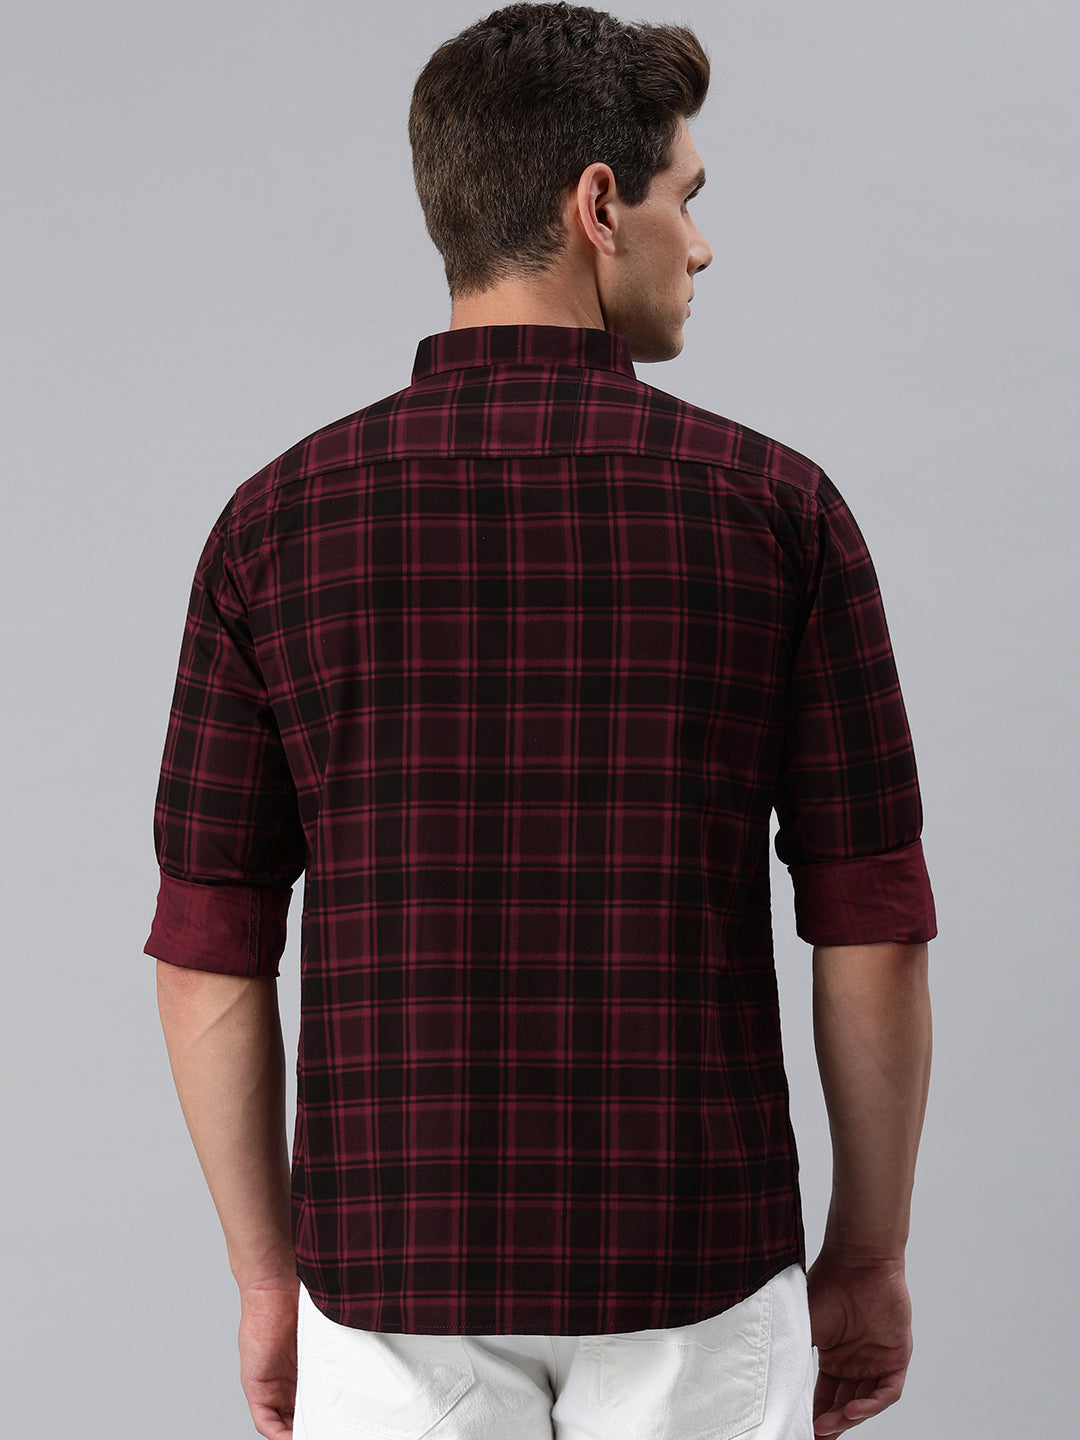 Majestic Man Checkered Slim fit Cotton Casual Shirt - Maroon